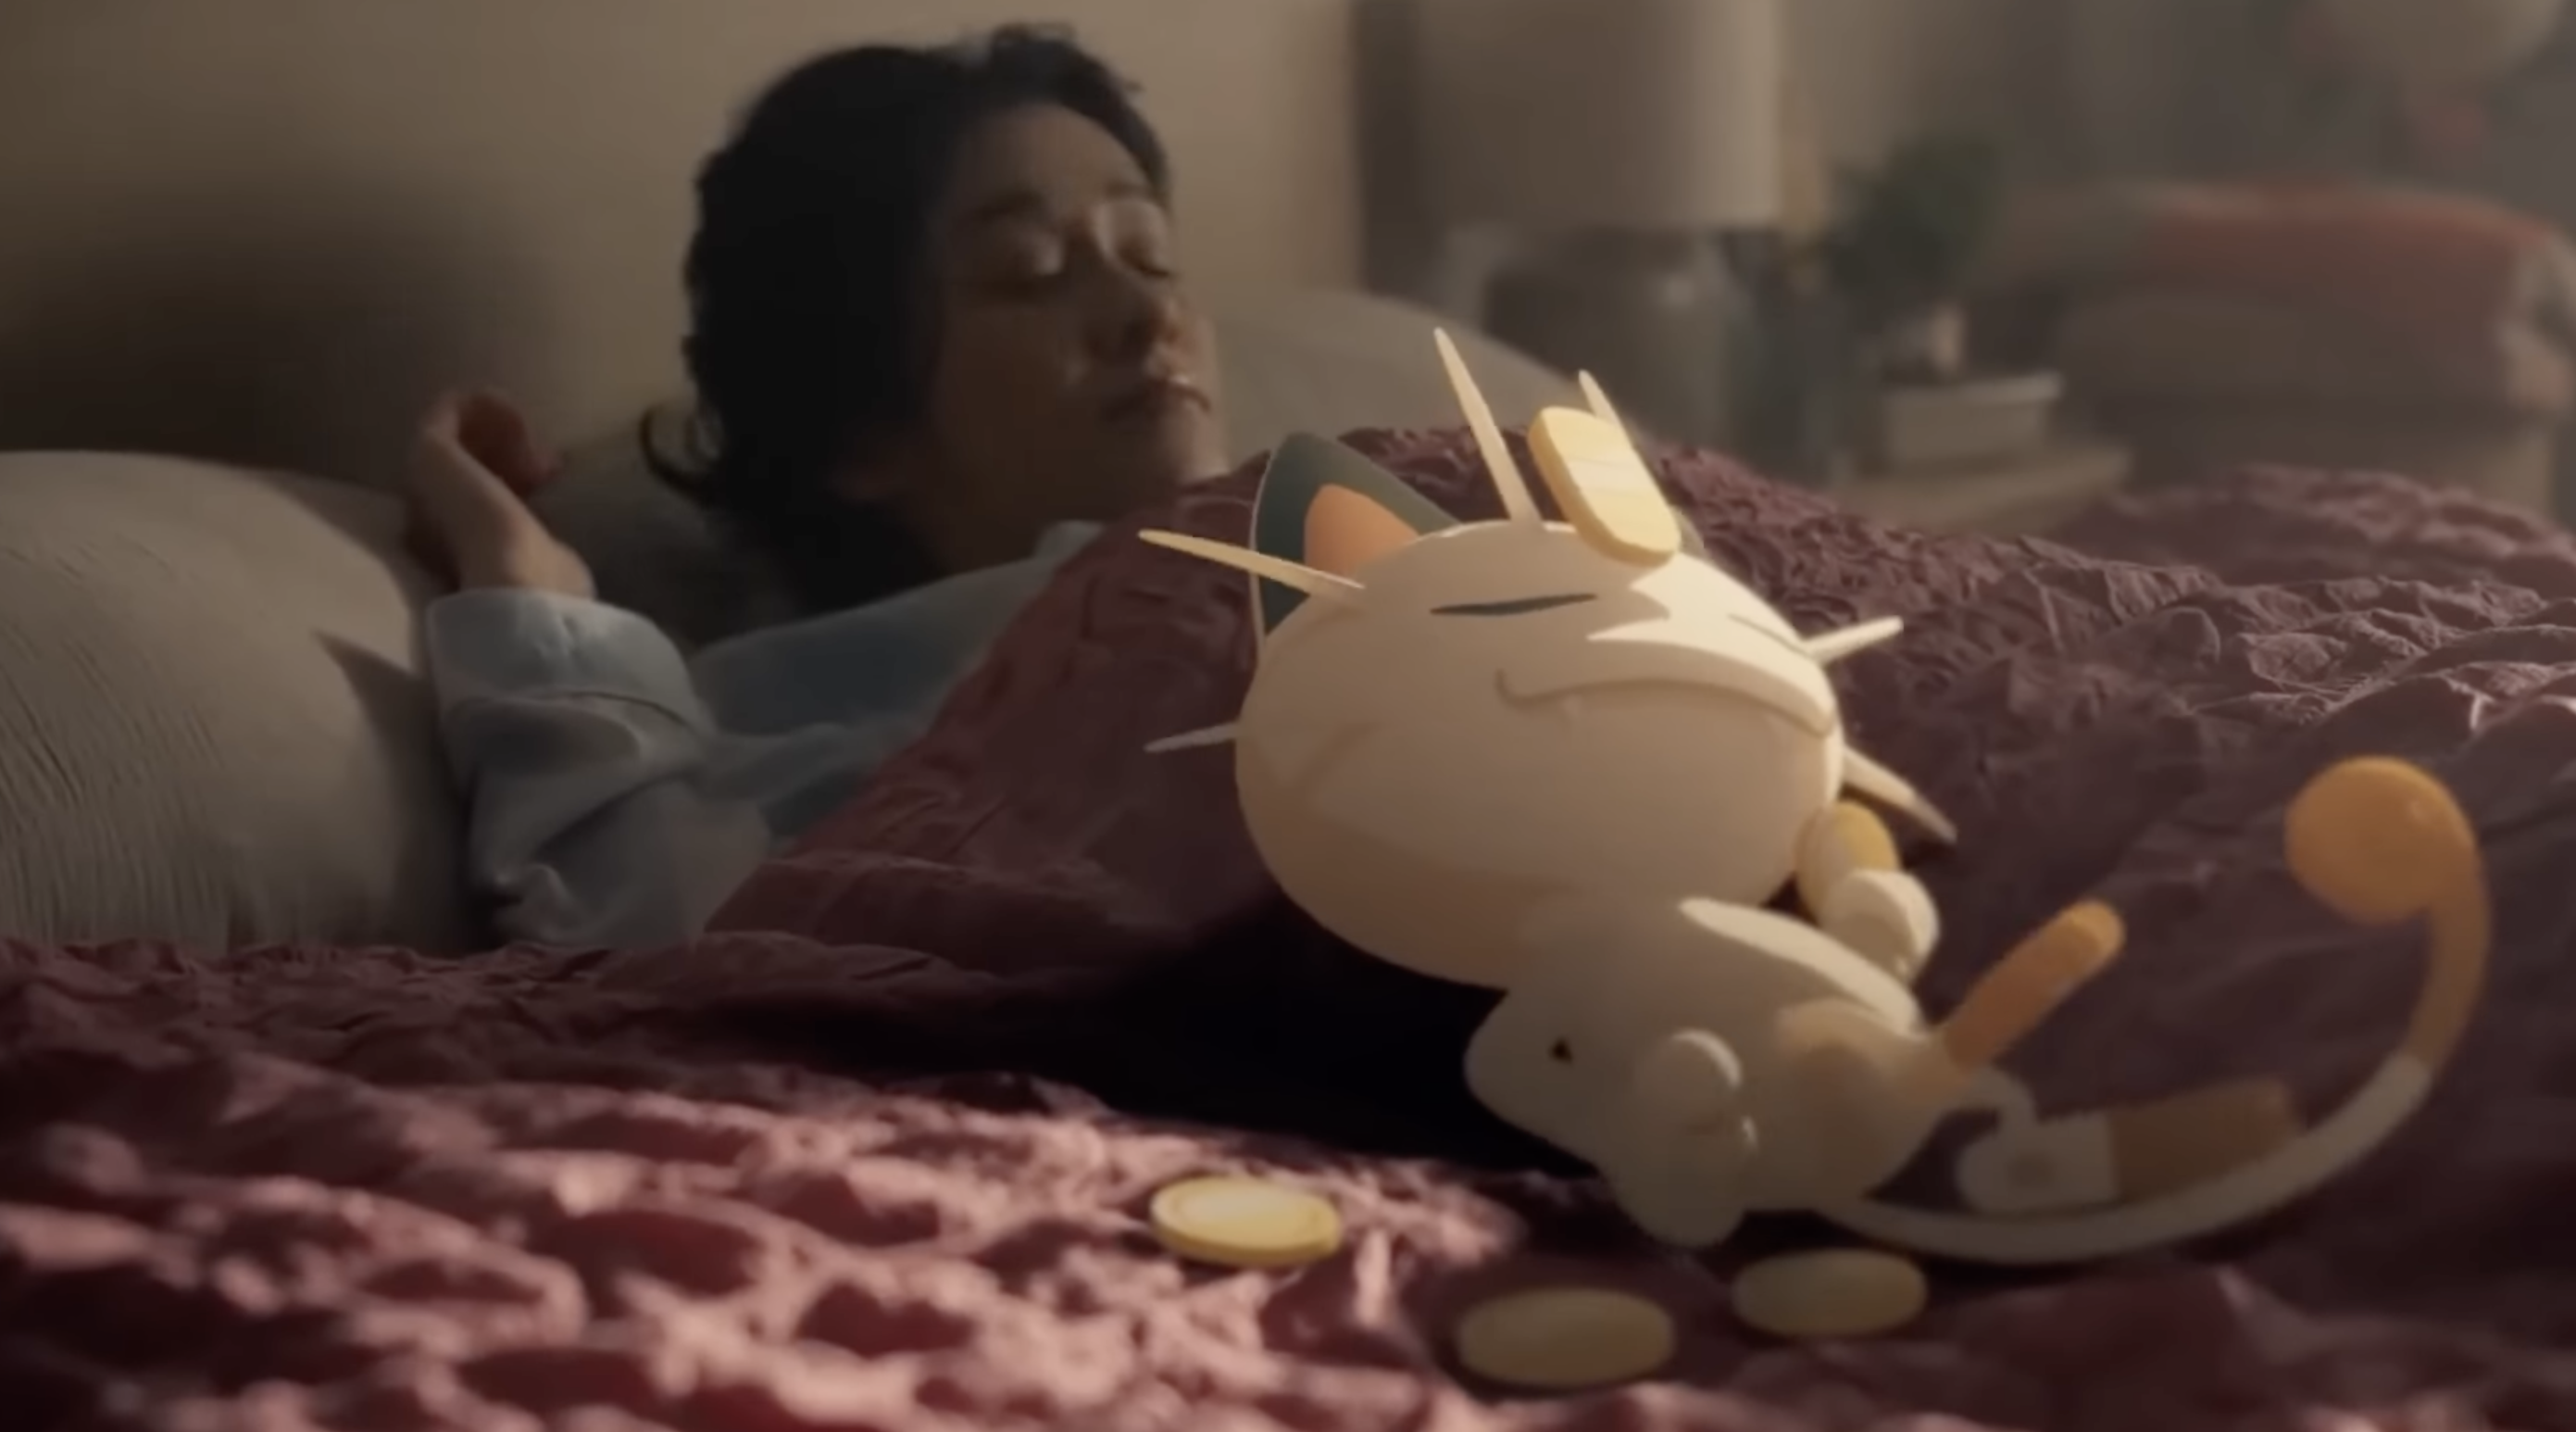 It's Time to Hit the Pillow and Play Pokémon Sleep